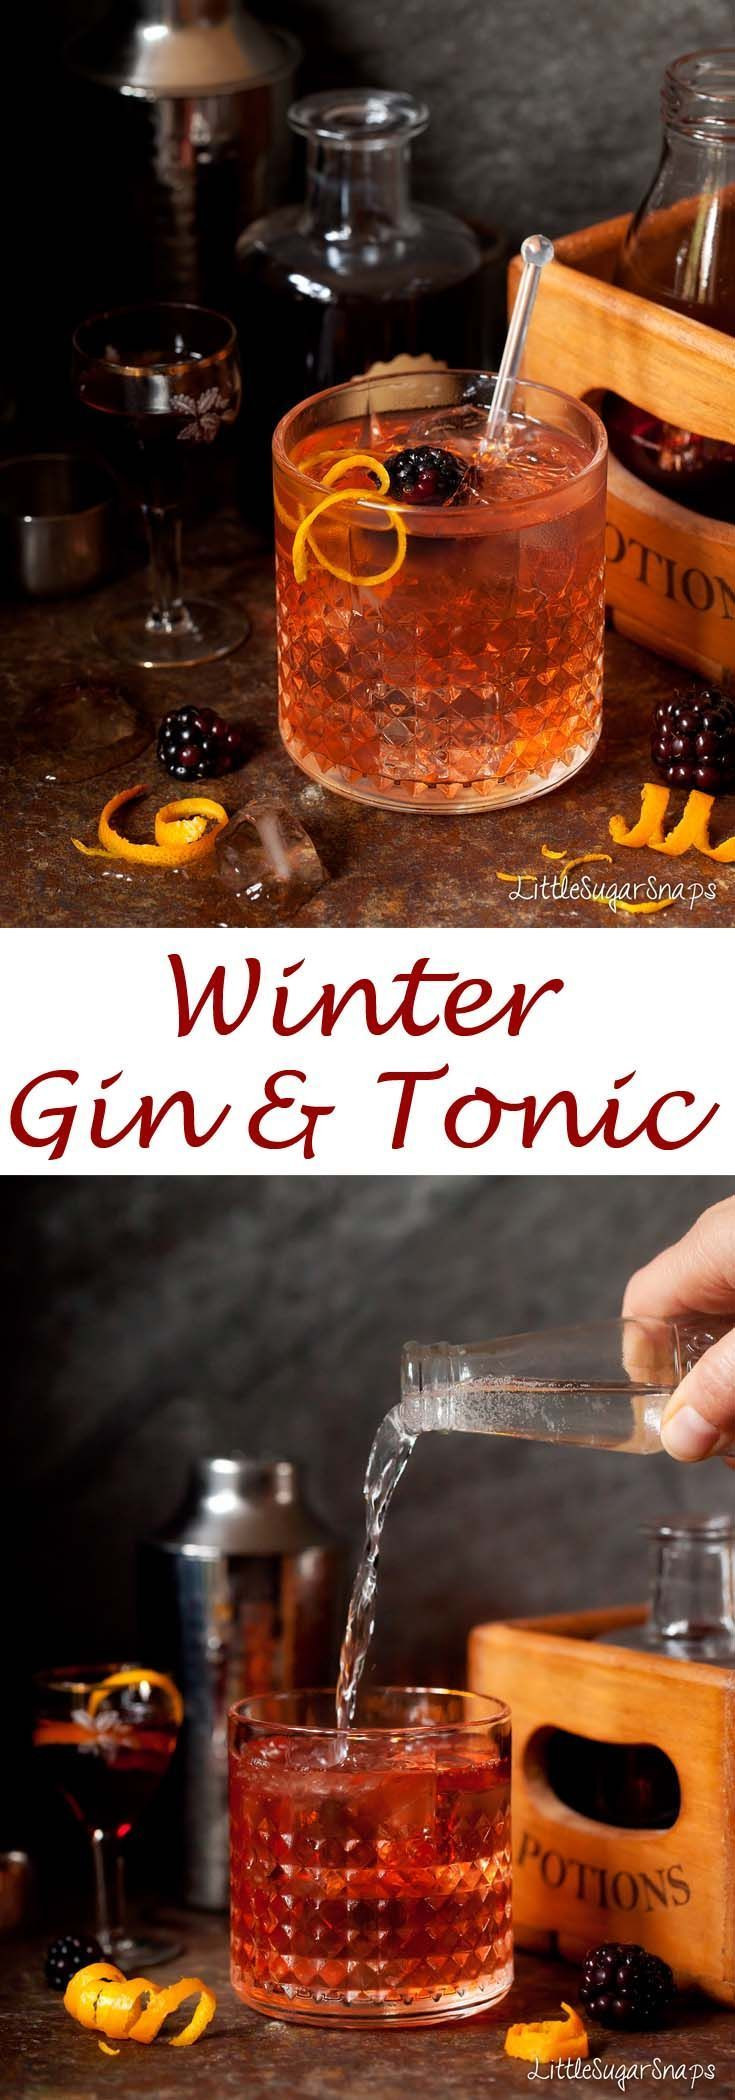 Gin Drinks For Winter
 The Winter Gin & Tonic is a twist on the classic G&T A